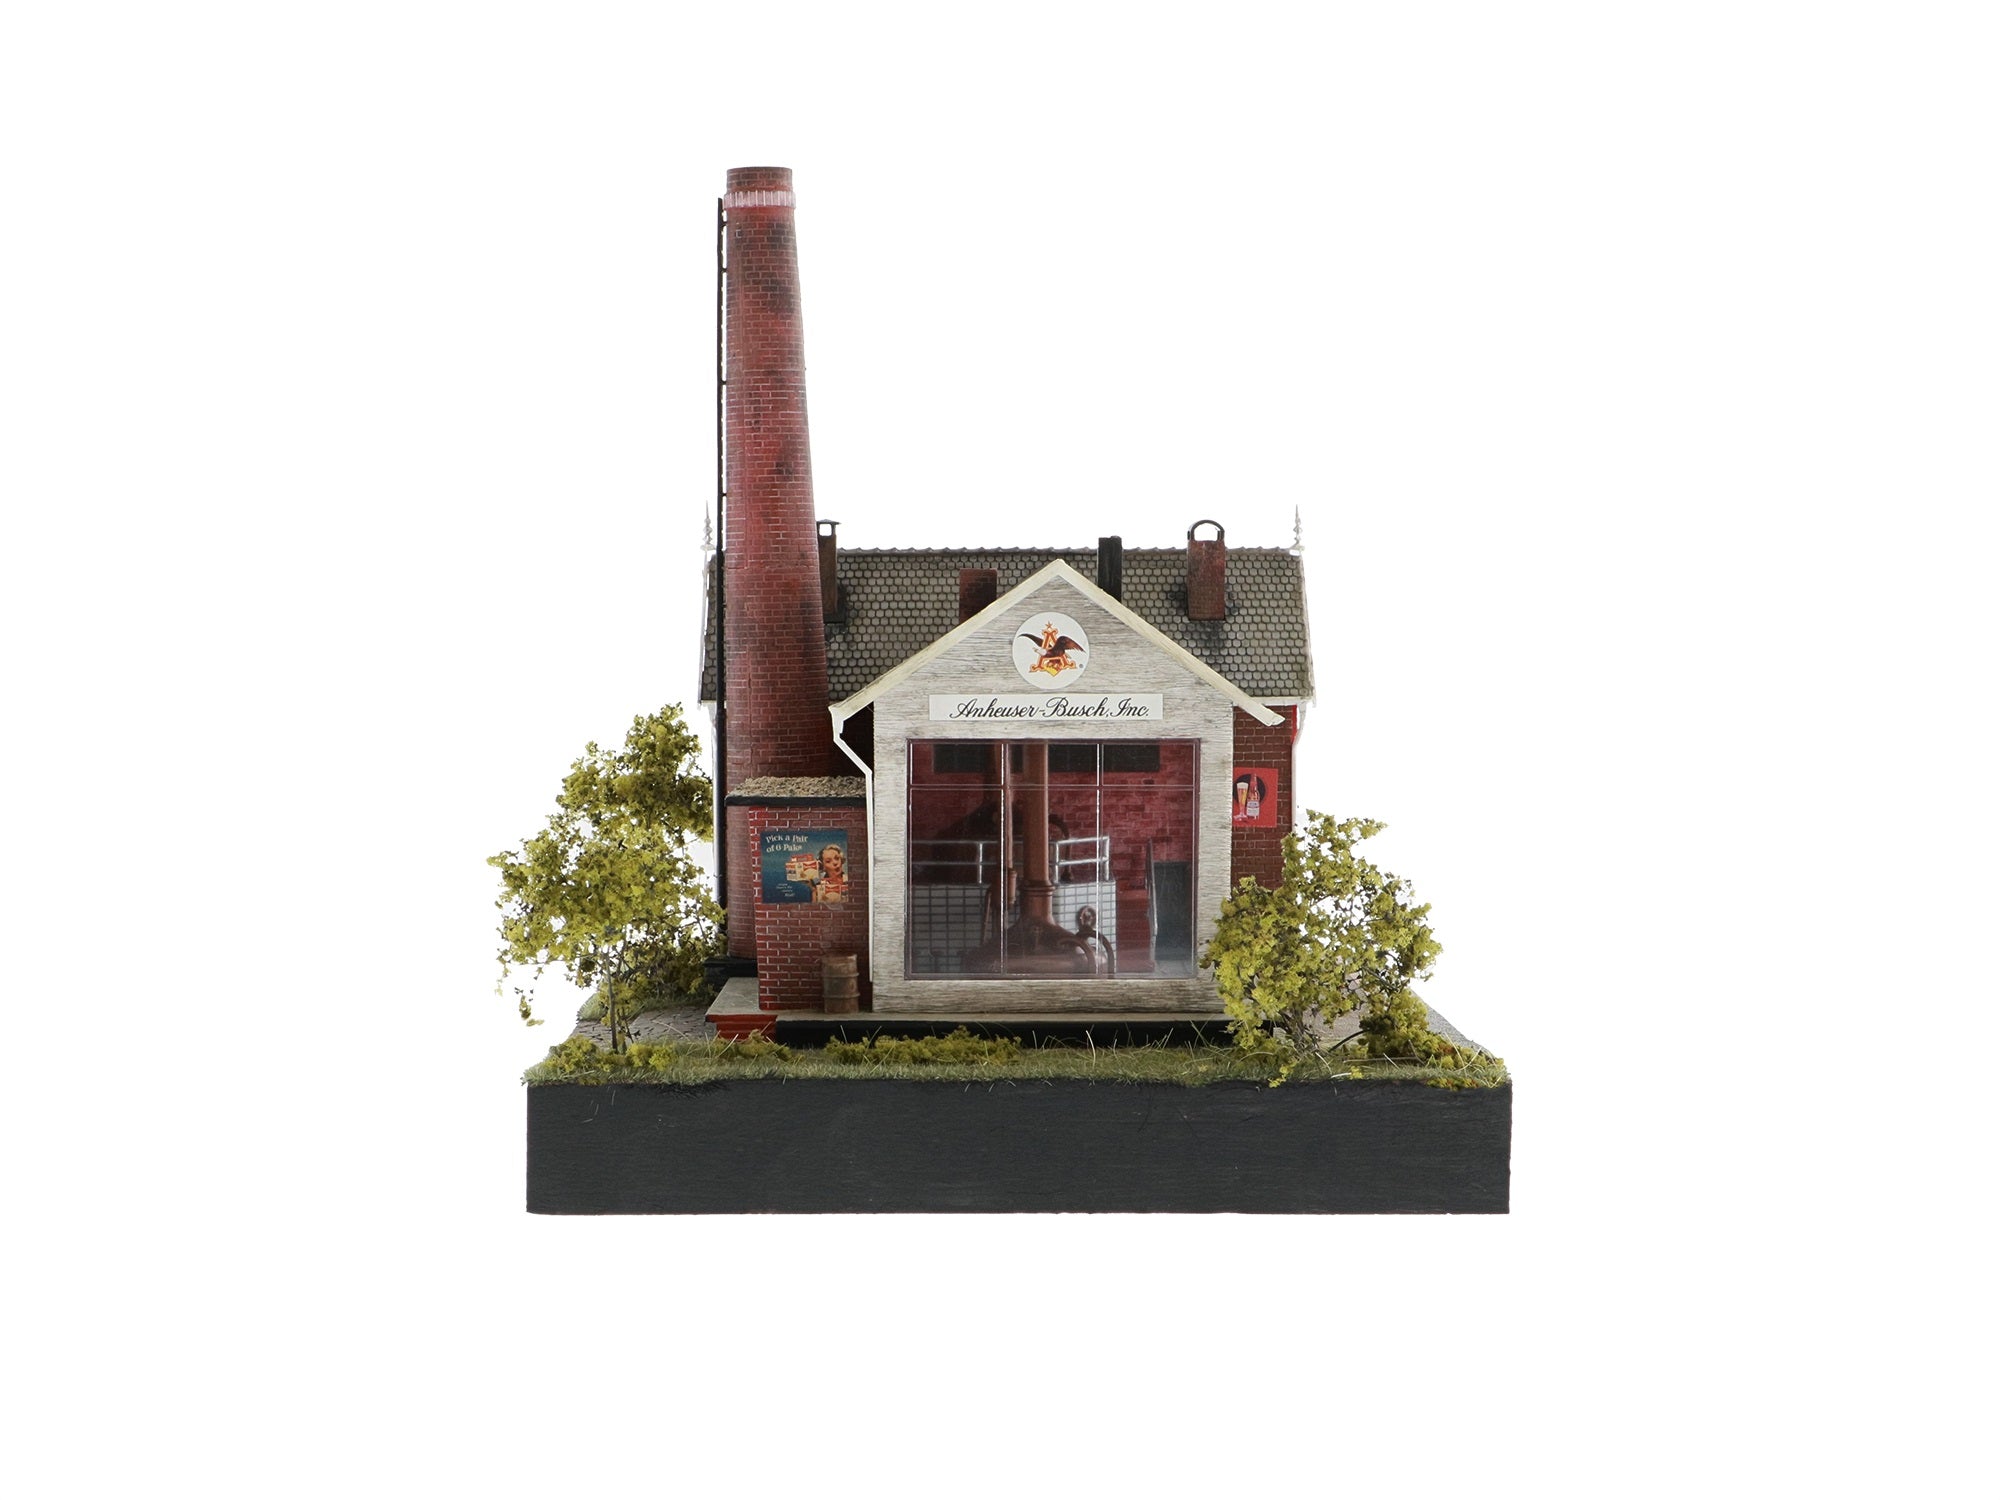 Lionel HO 2167110 - Anheuser-Busch - Brewery Building Kit